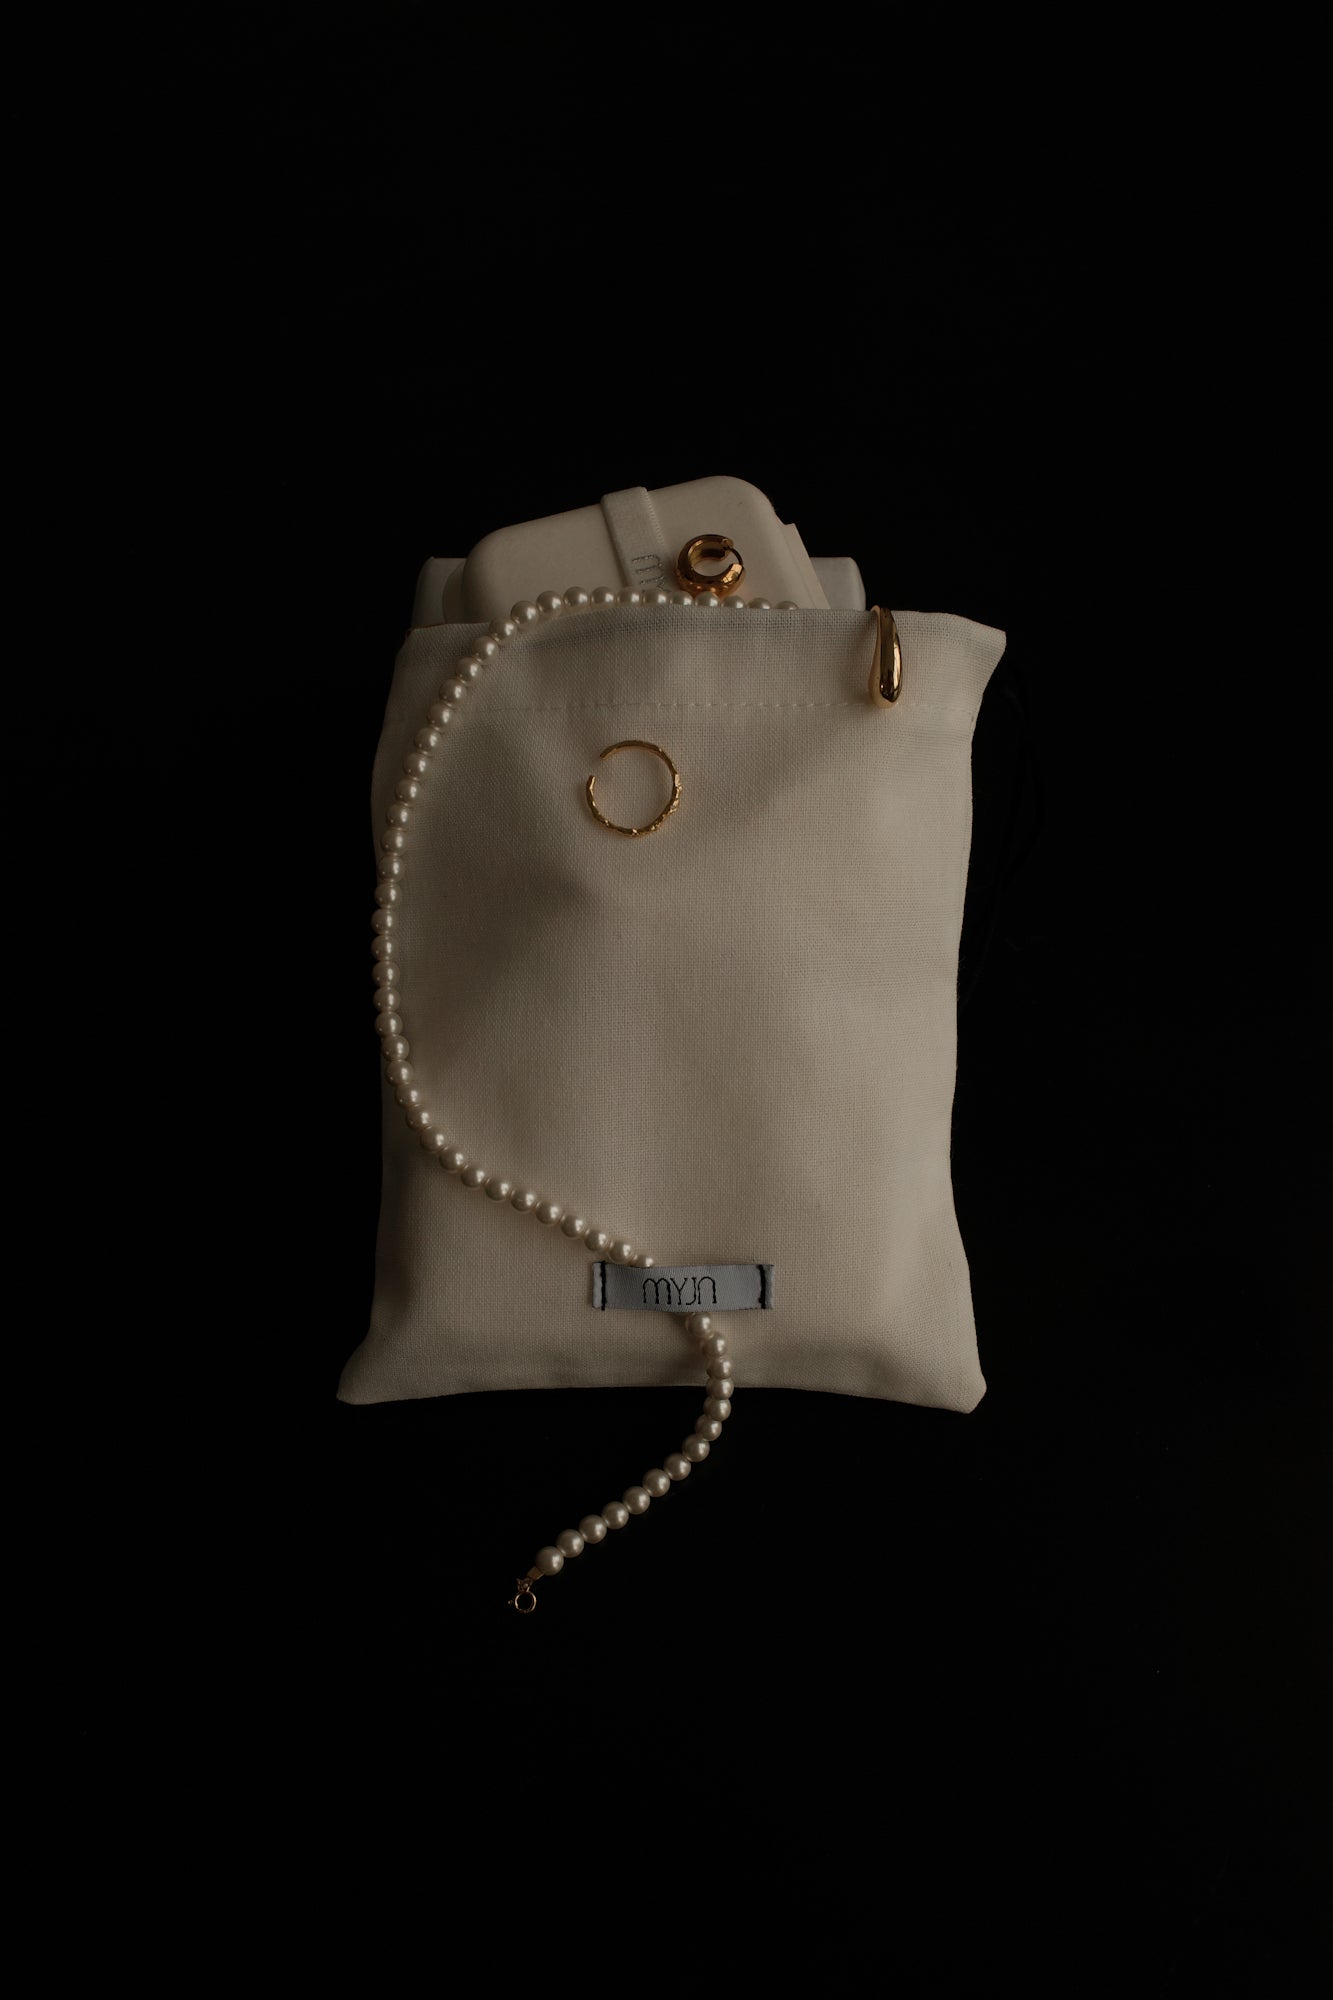 The Limited Edition Cotton Linen Pouch